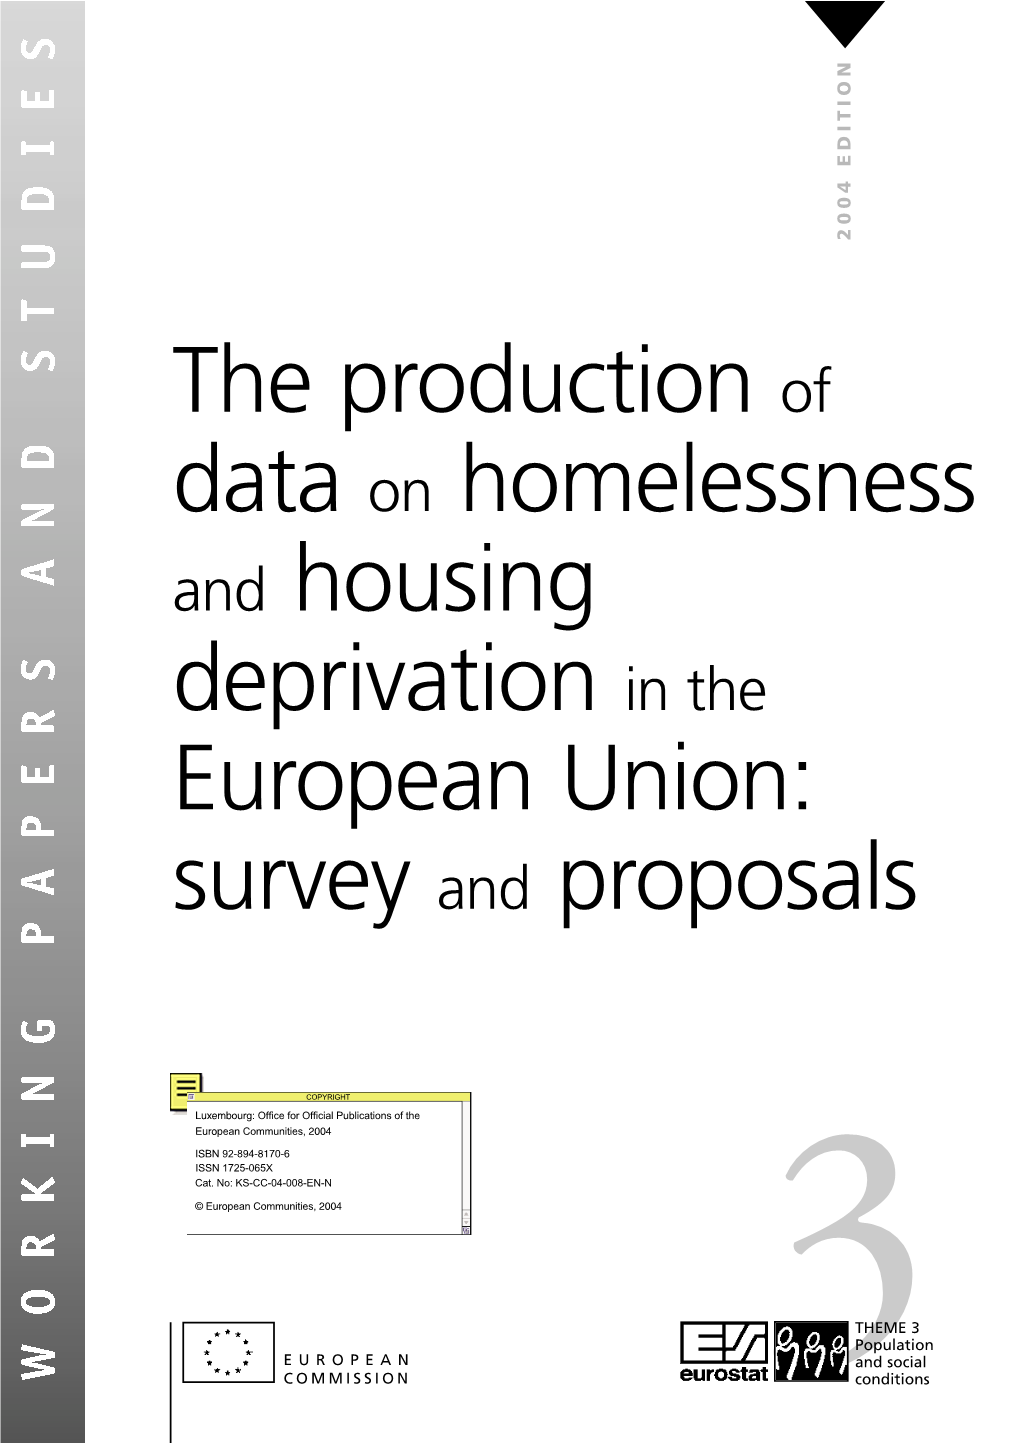 The Production of Data on Homelessness and Housing Deprivation in the European Union: Survey and Proposals